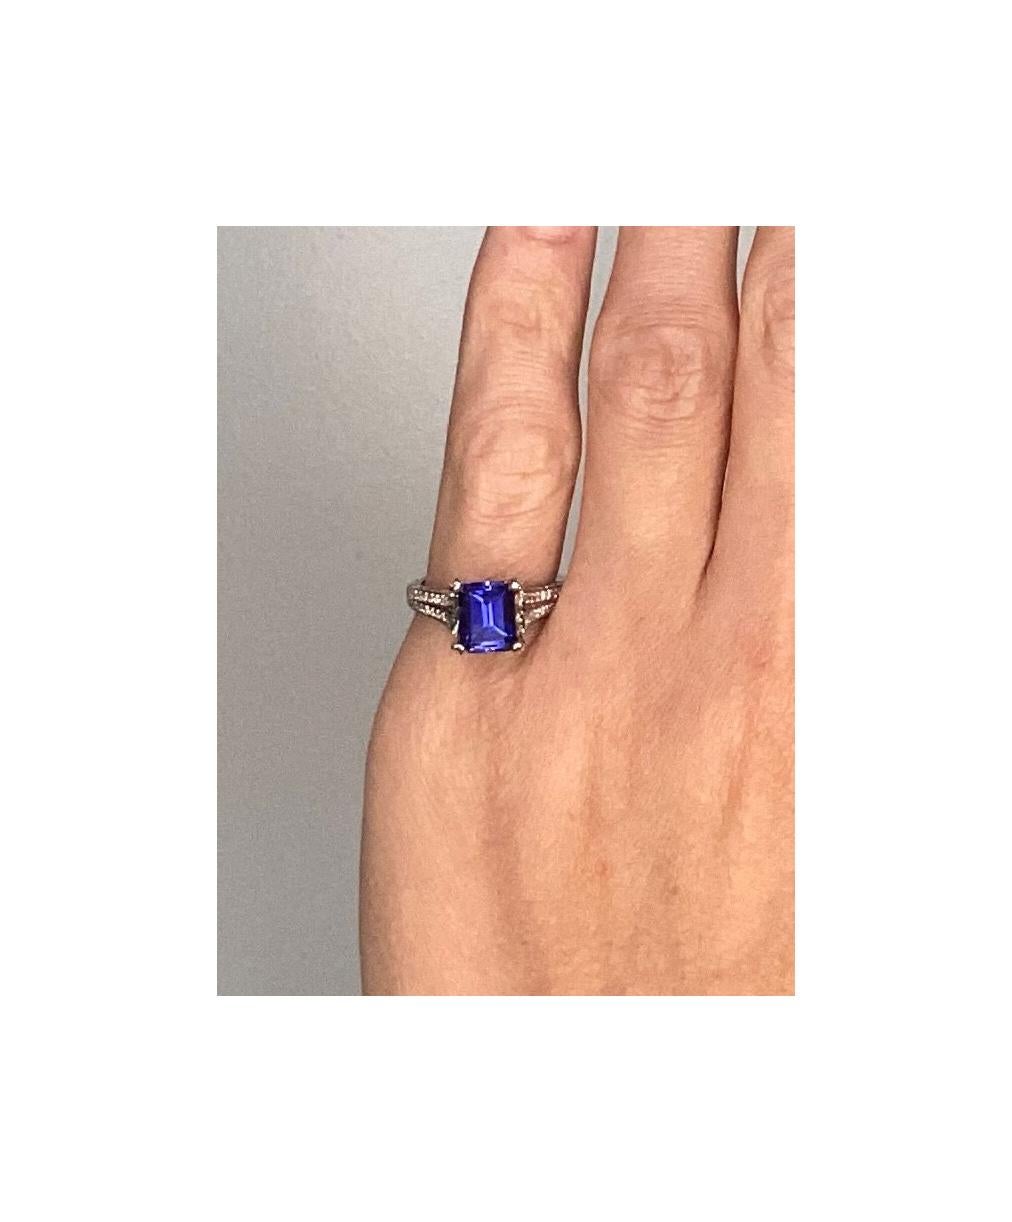 Charles Krypell Modern Ring in Platinum with 4.91 Ctw in Diamonds and Tanzanite For Sale 3